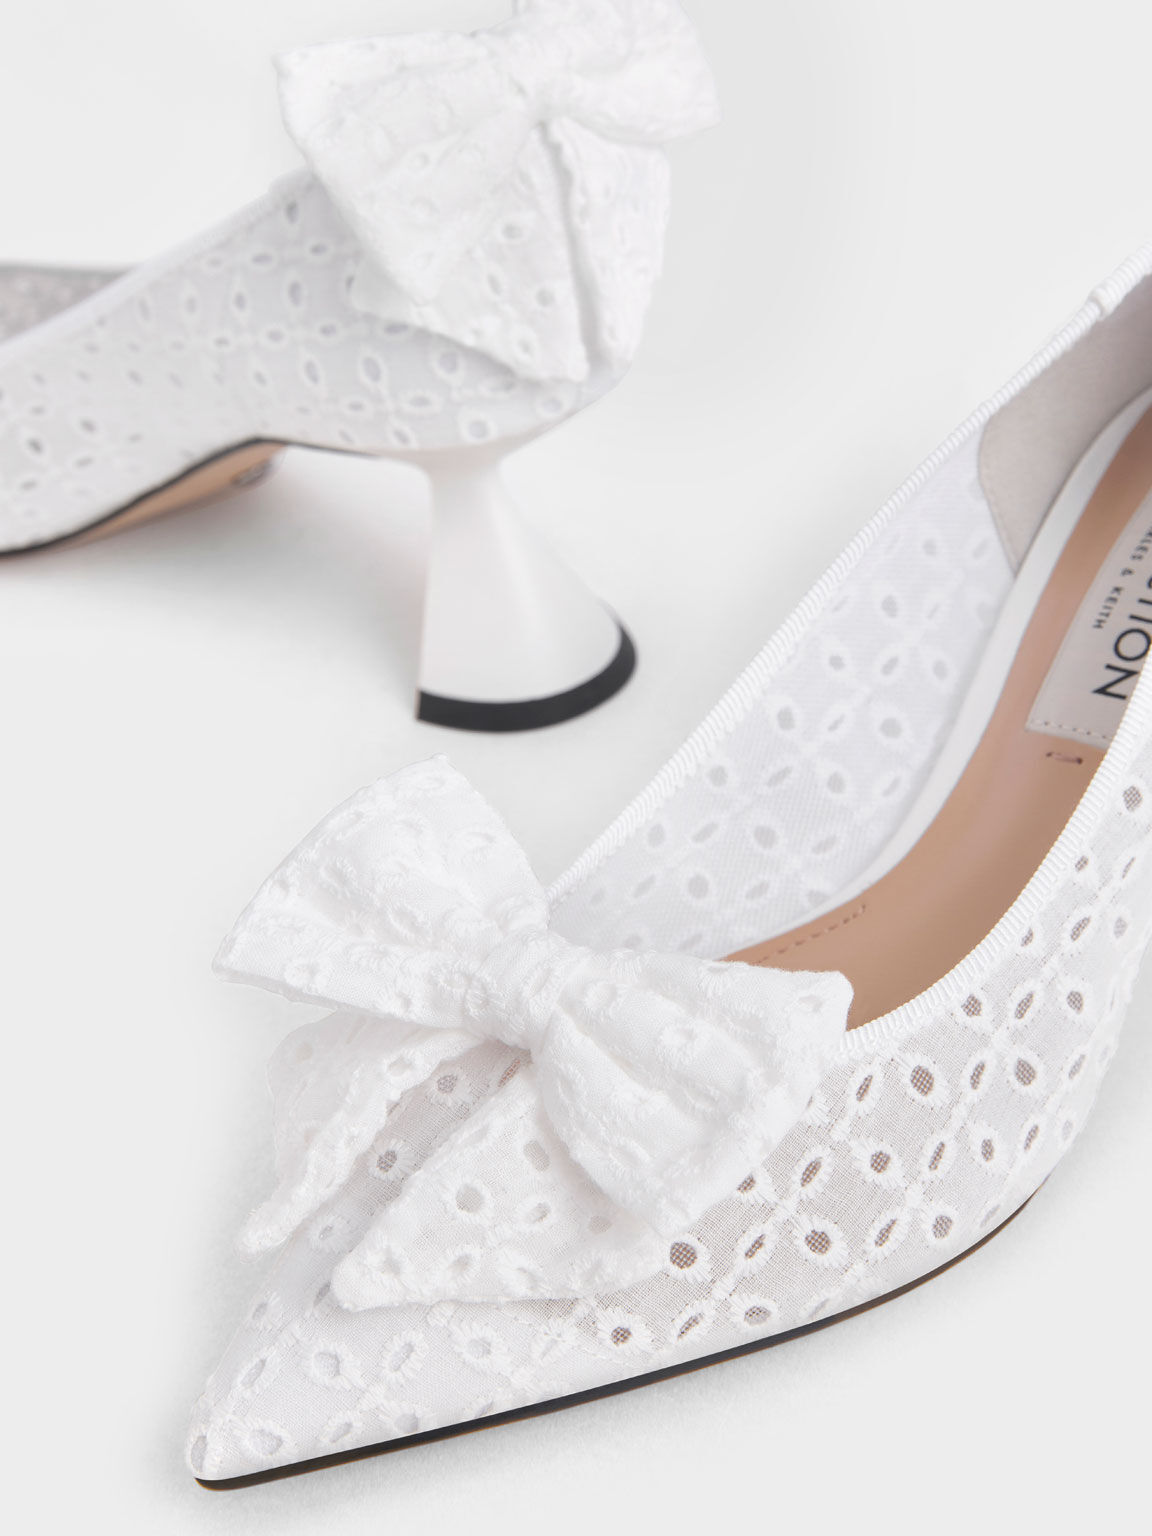 The Bridal Collection: Sandal Pumps Blythe Broderie Anglaise Sculptural Heel, White, hi-res